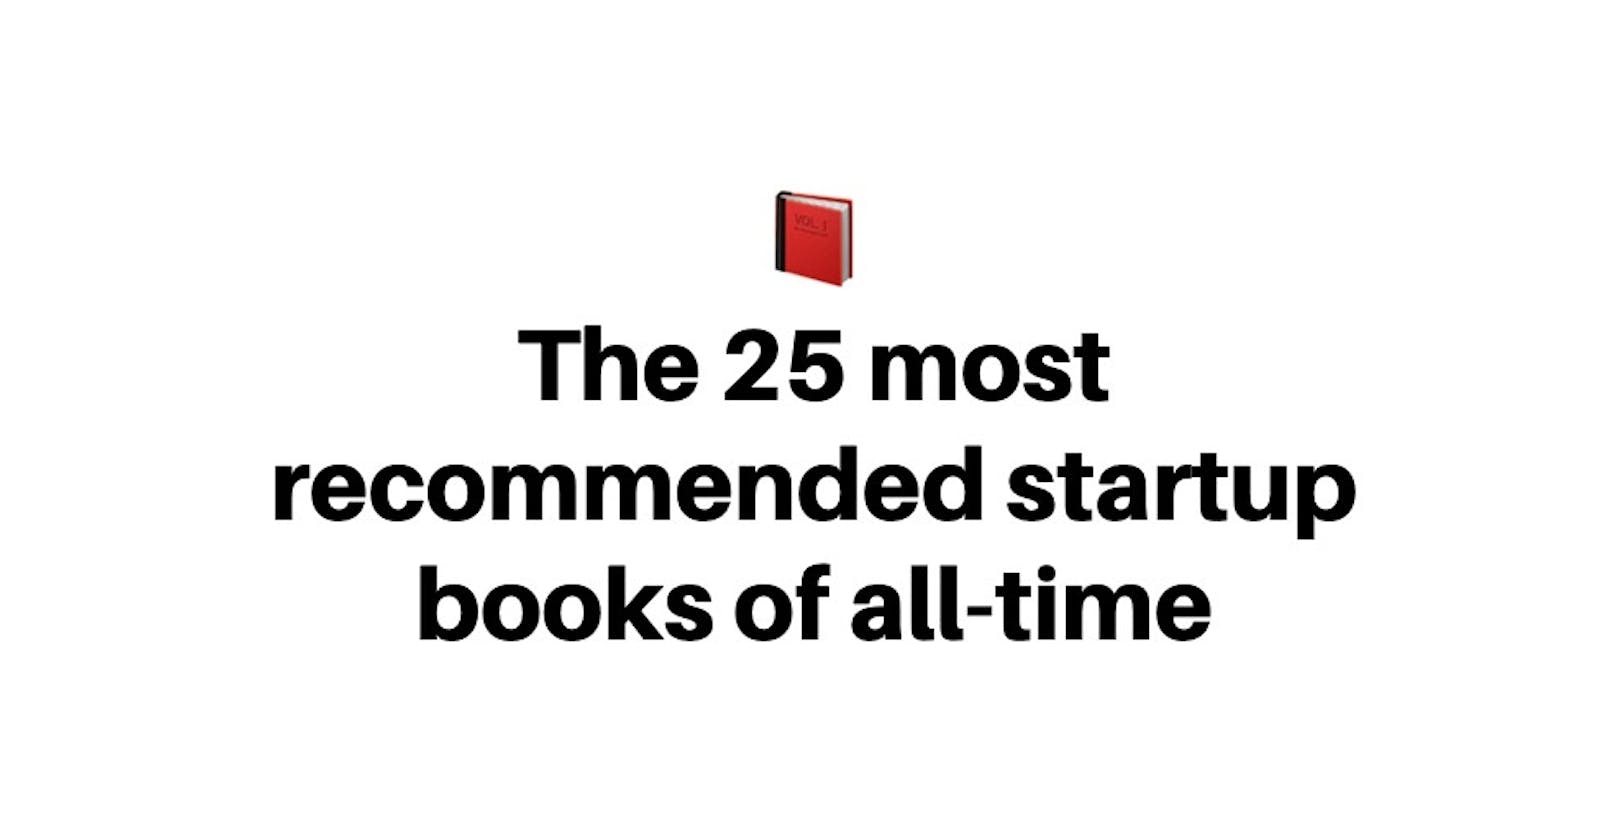 The 25 most recommended startup books of all time